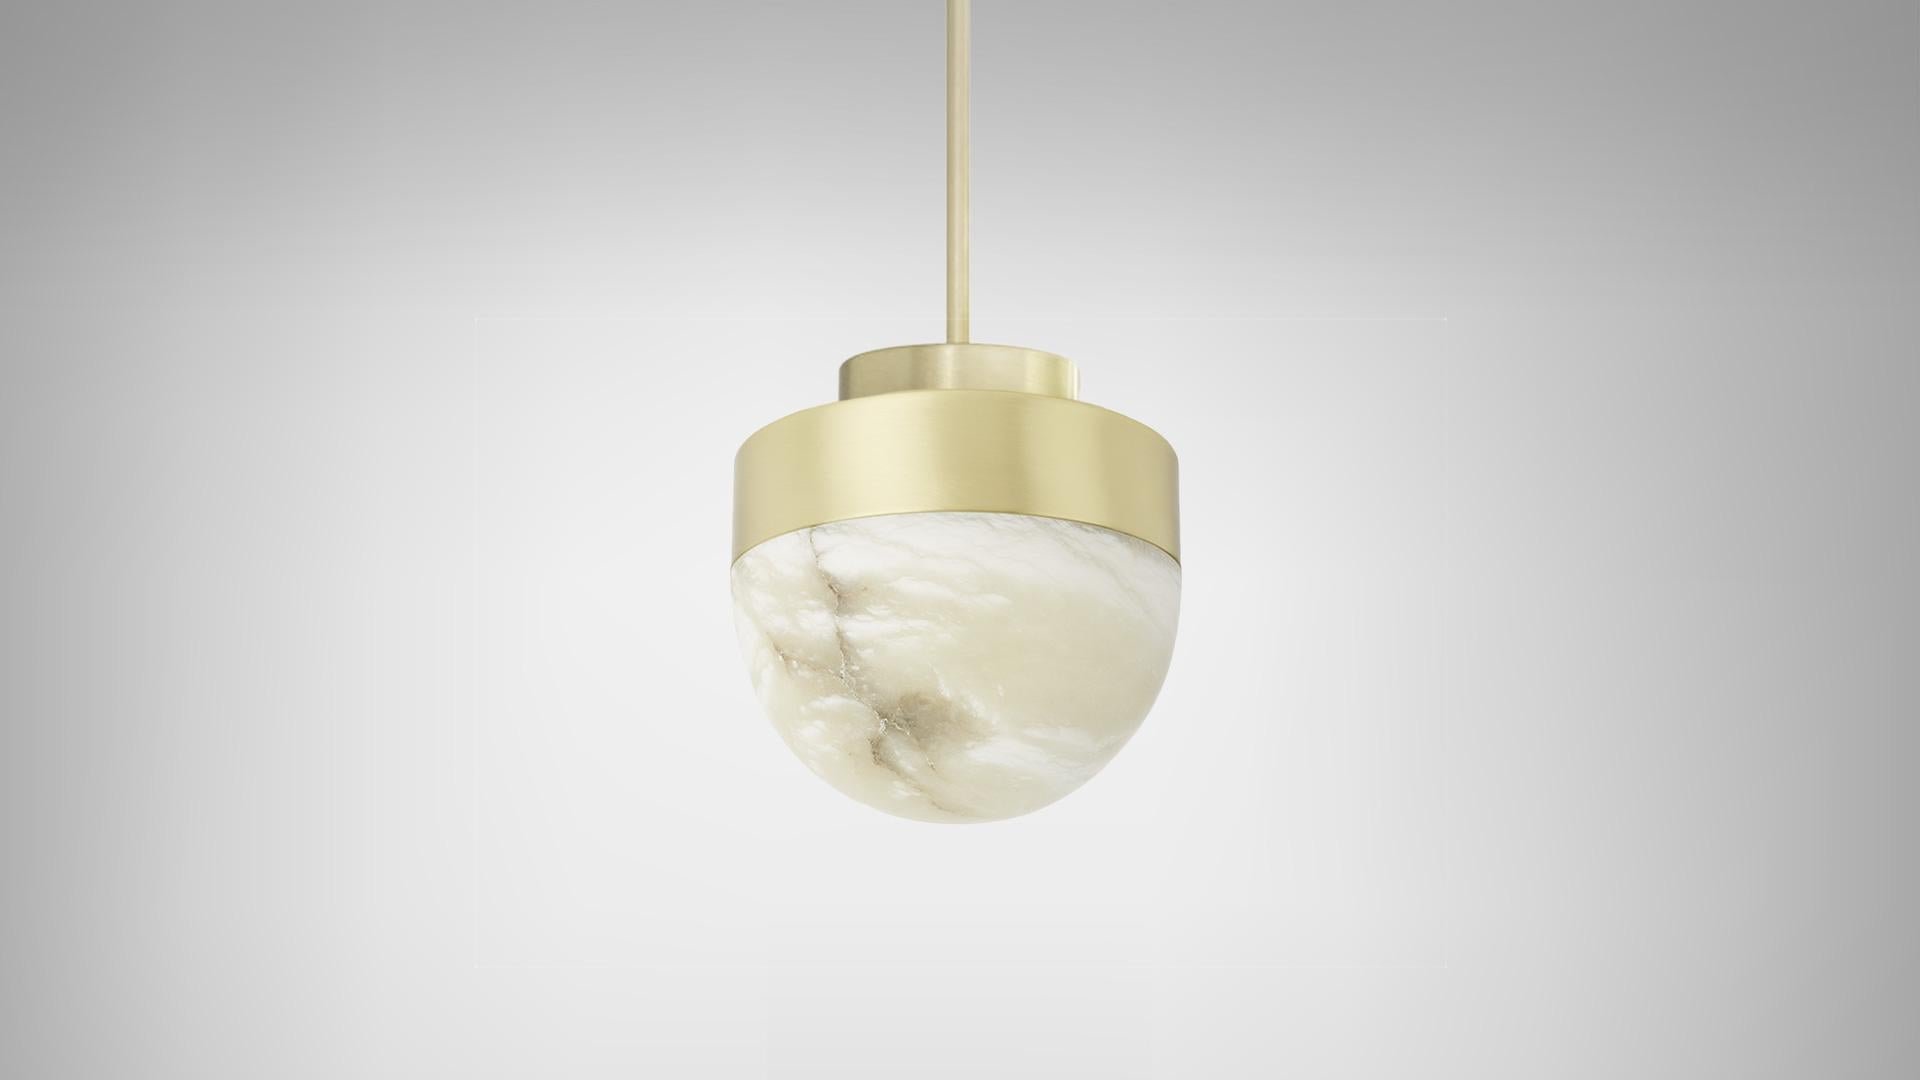 Lucid 300 pendant by CTO lighting
Materials: honed alabaster with satin brass base.
Also available in honed alabaster with bronze base.
Dimensions: H 33 x W 30 cm

All our lamps can be wired according to each country. If sold to the USA it will